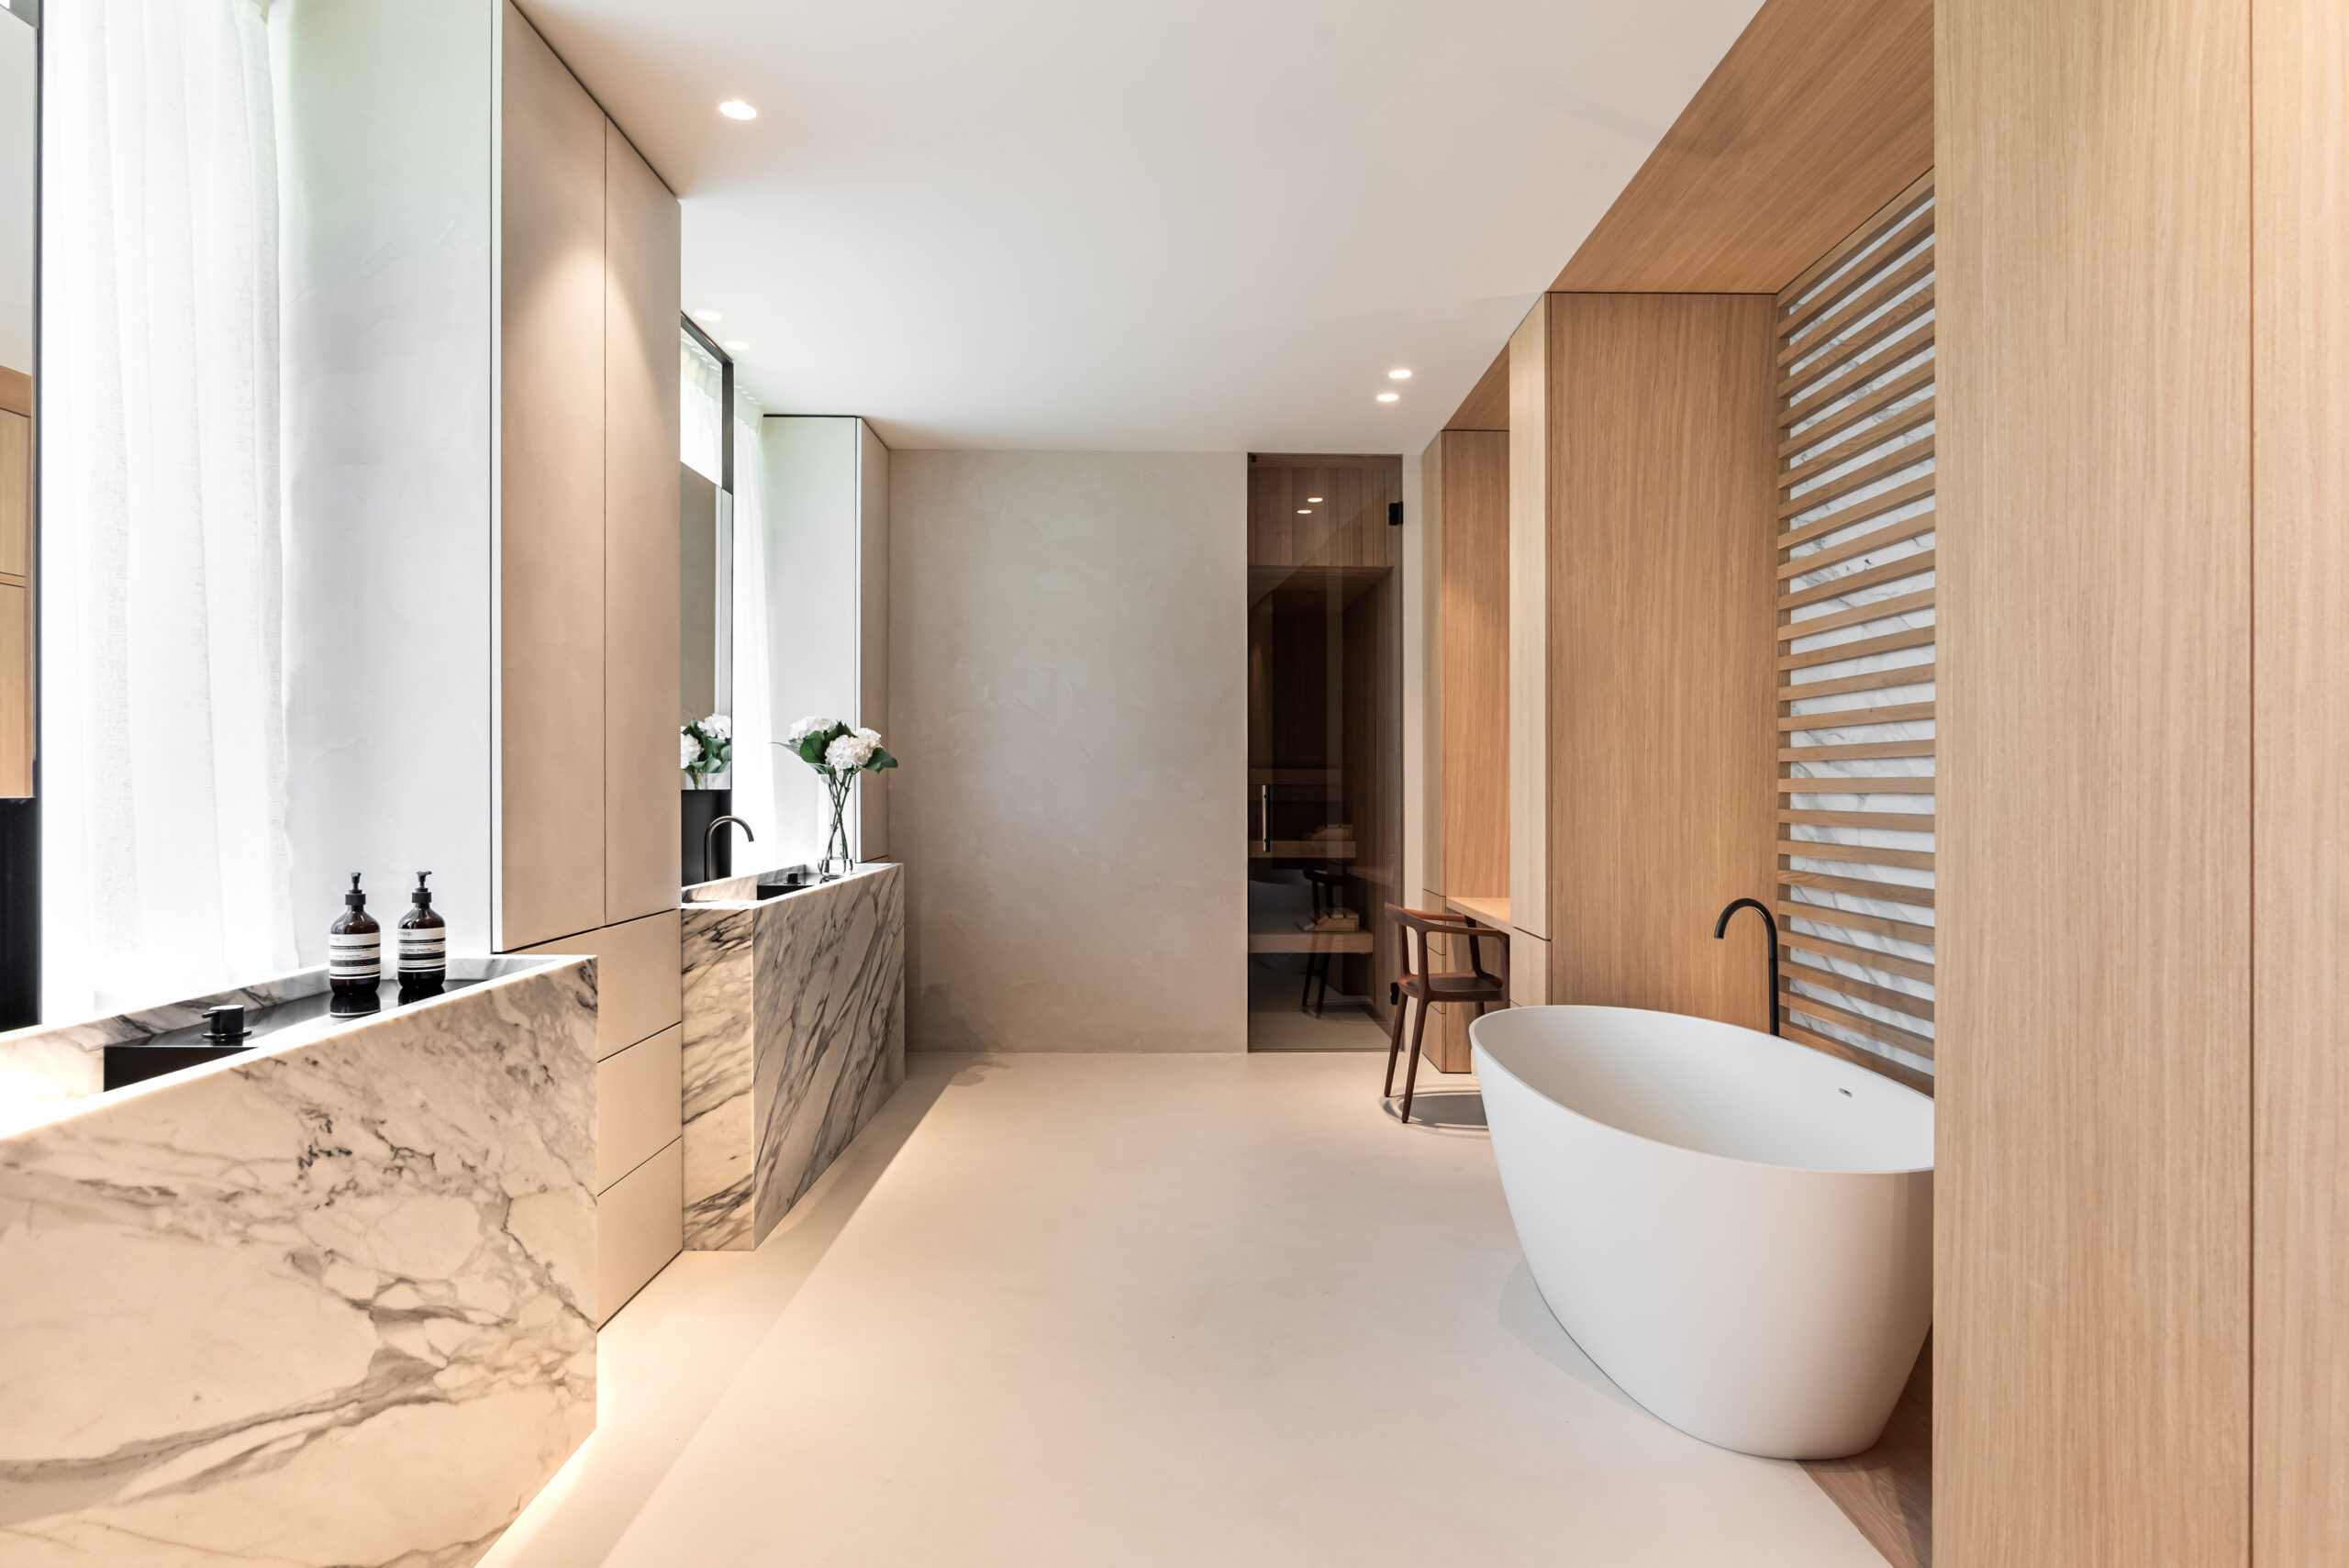 Modern bathroom with a marble countertop, wooden panels, and a standalone white bathtub